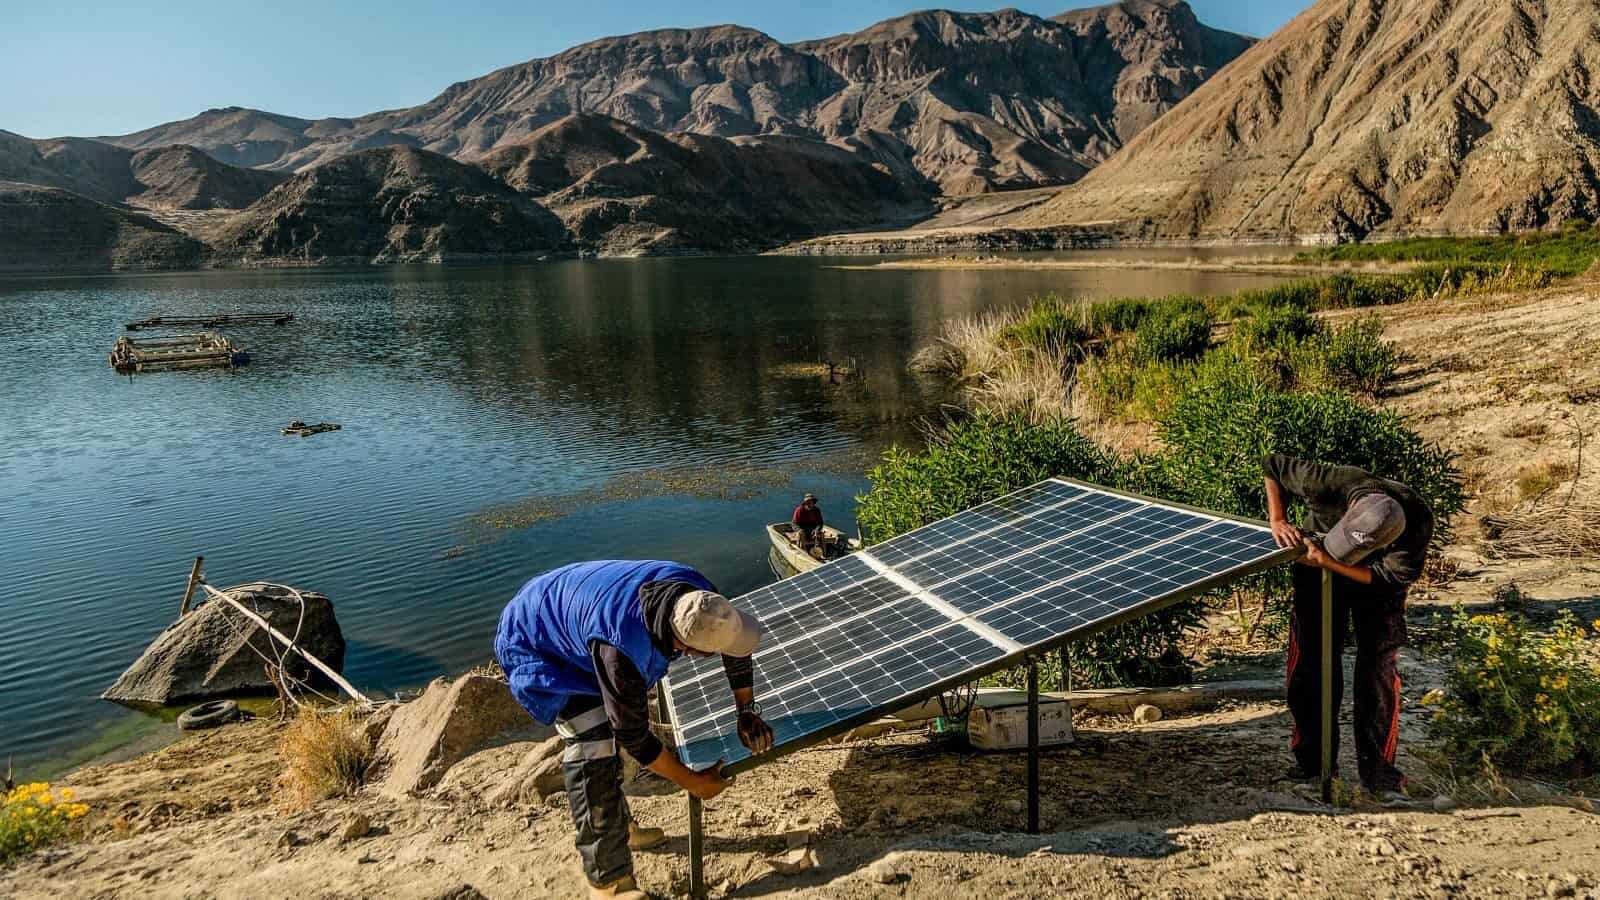 People installing solar panel by a lake in Peru mountains